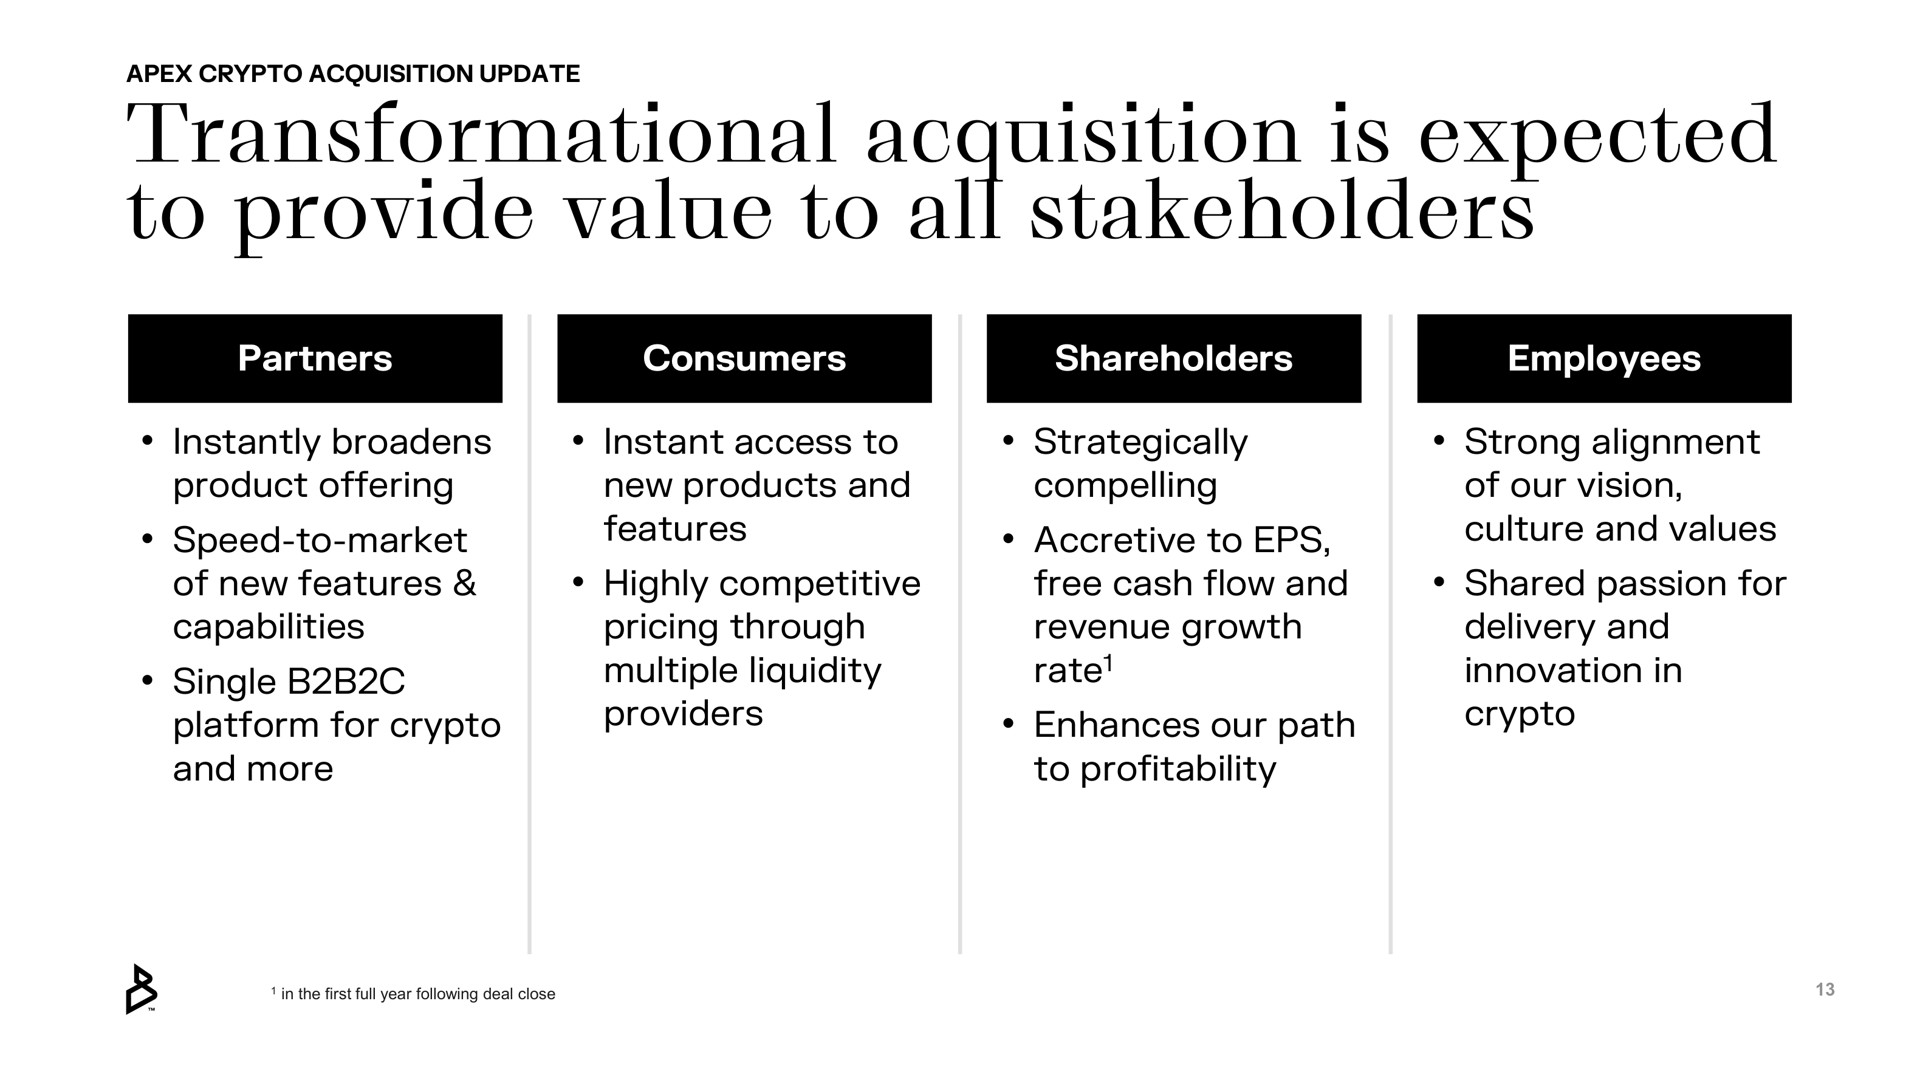 acquisition is expected to provide value to all stakeholders | Bakkt